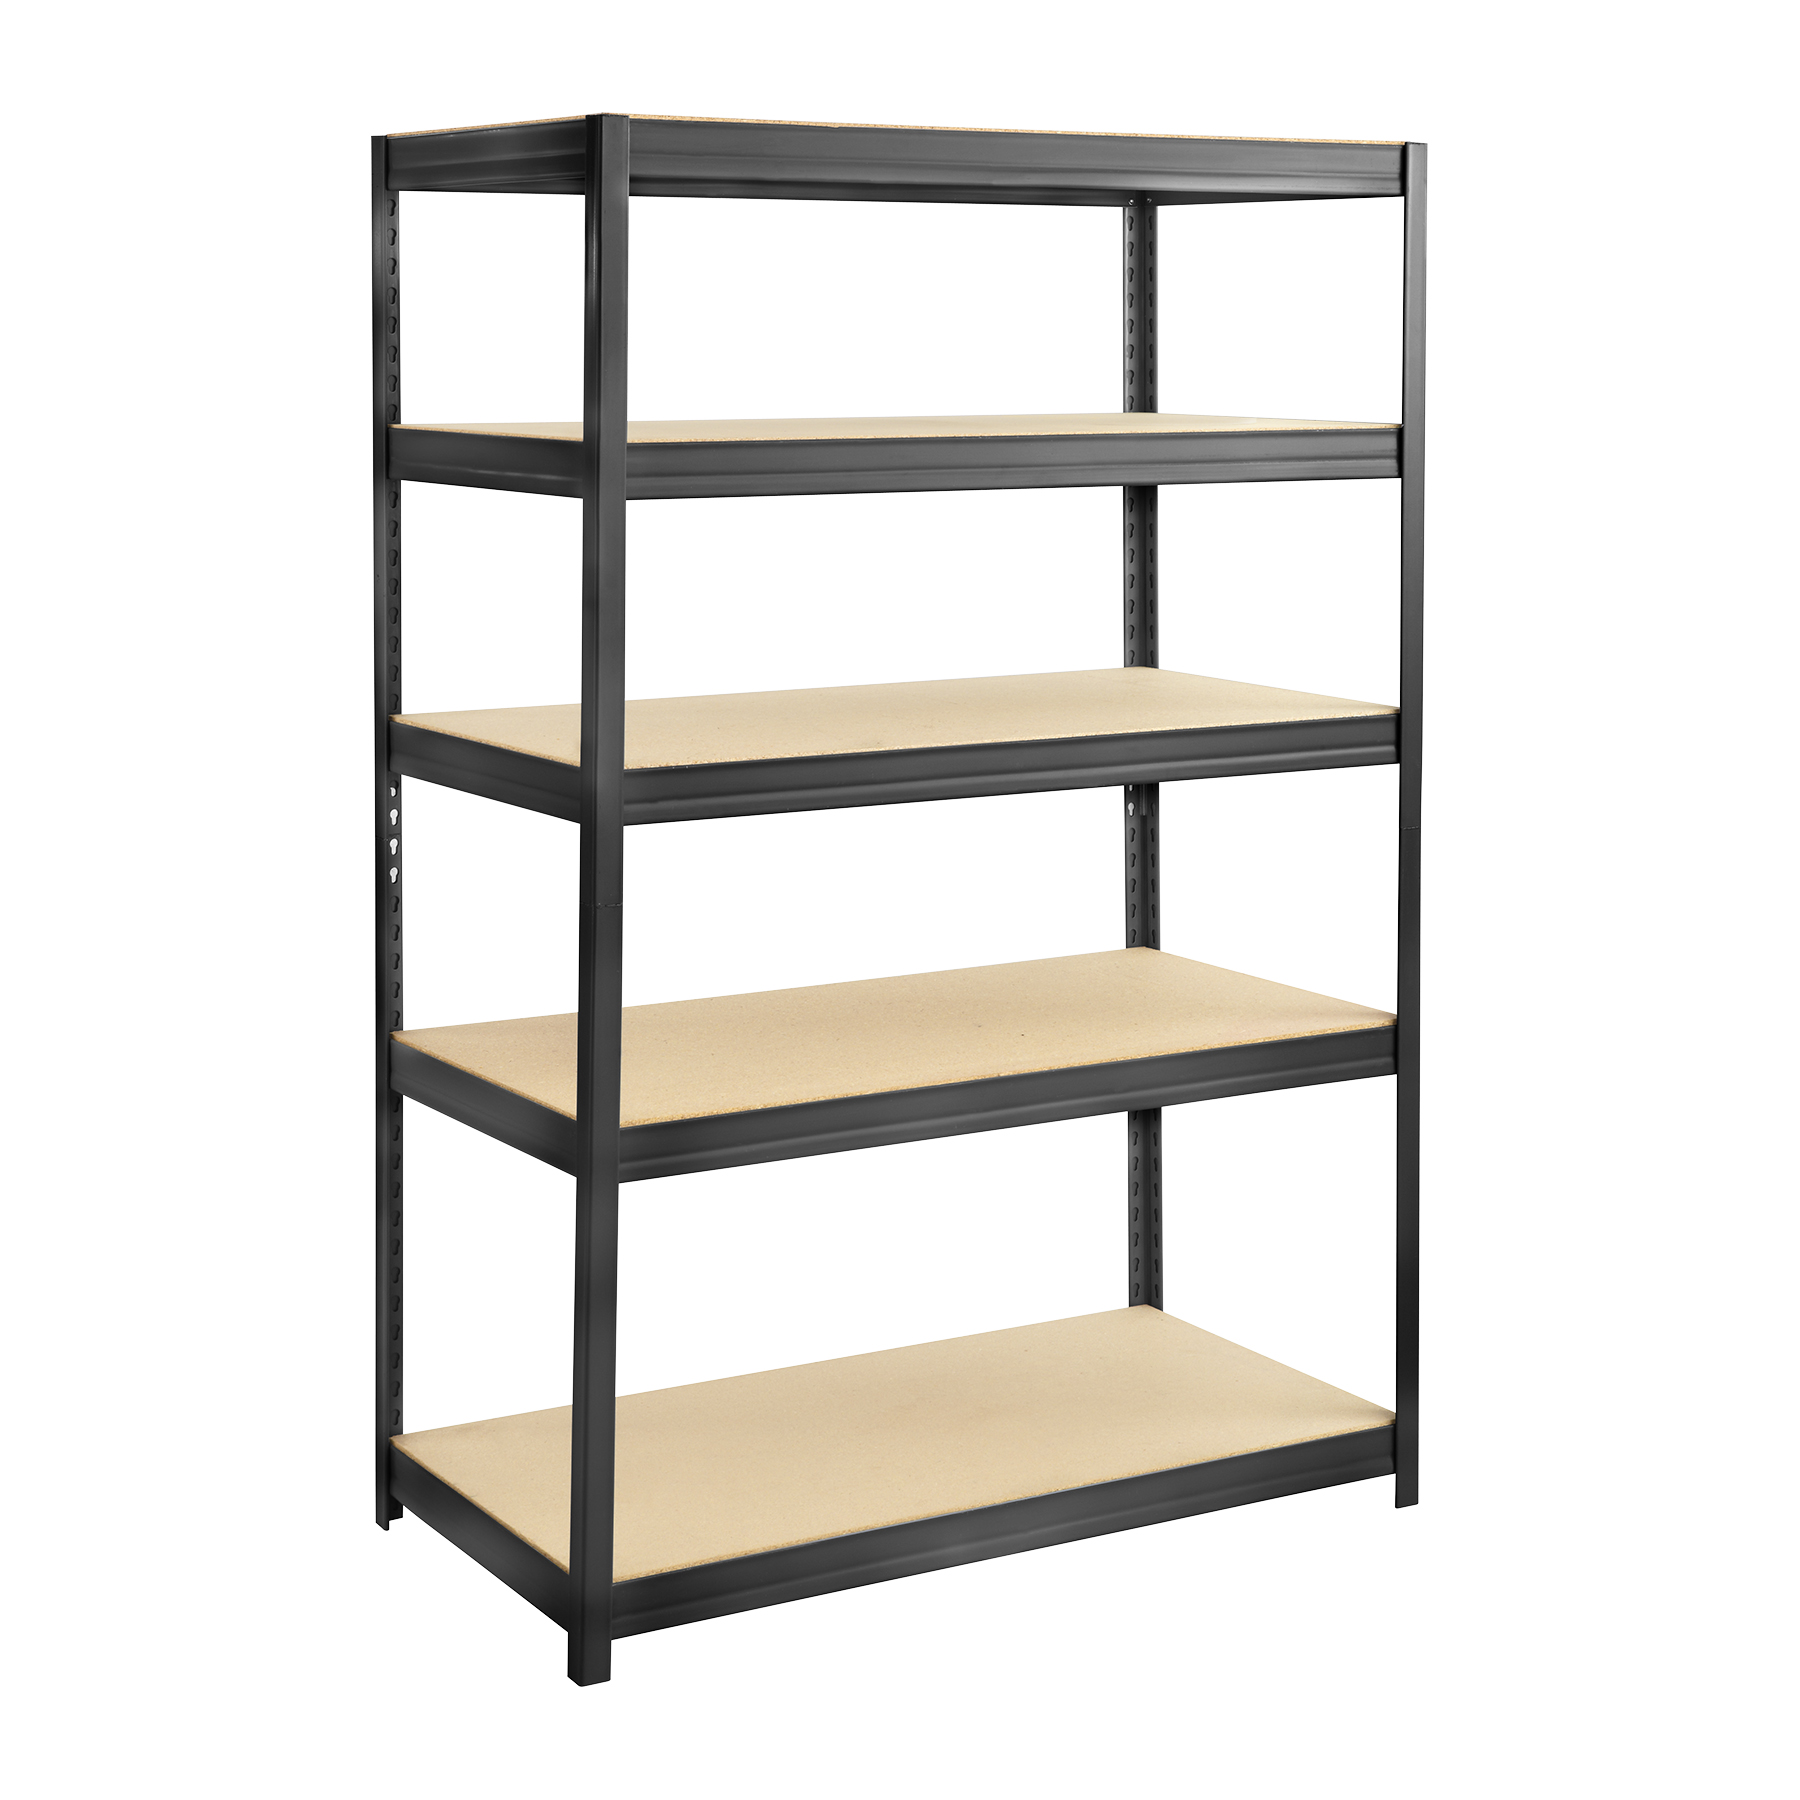 Particleboard Shelving 48x24, Metal Shelving With Particle Board